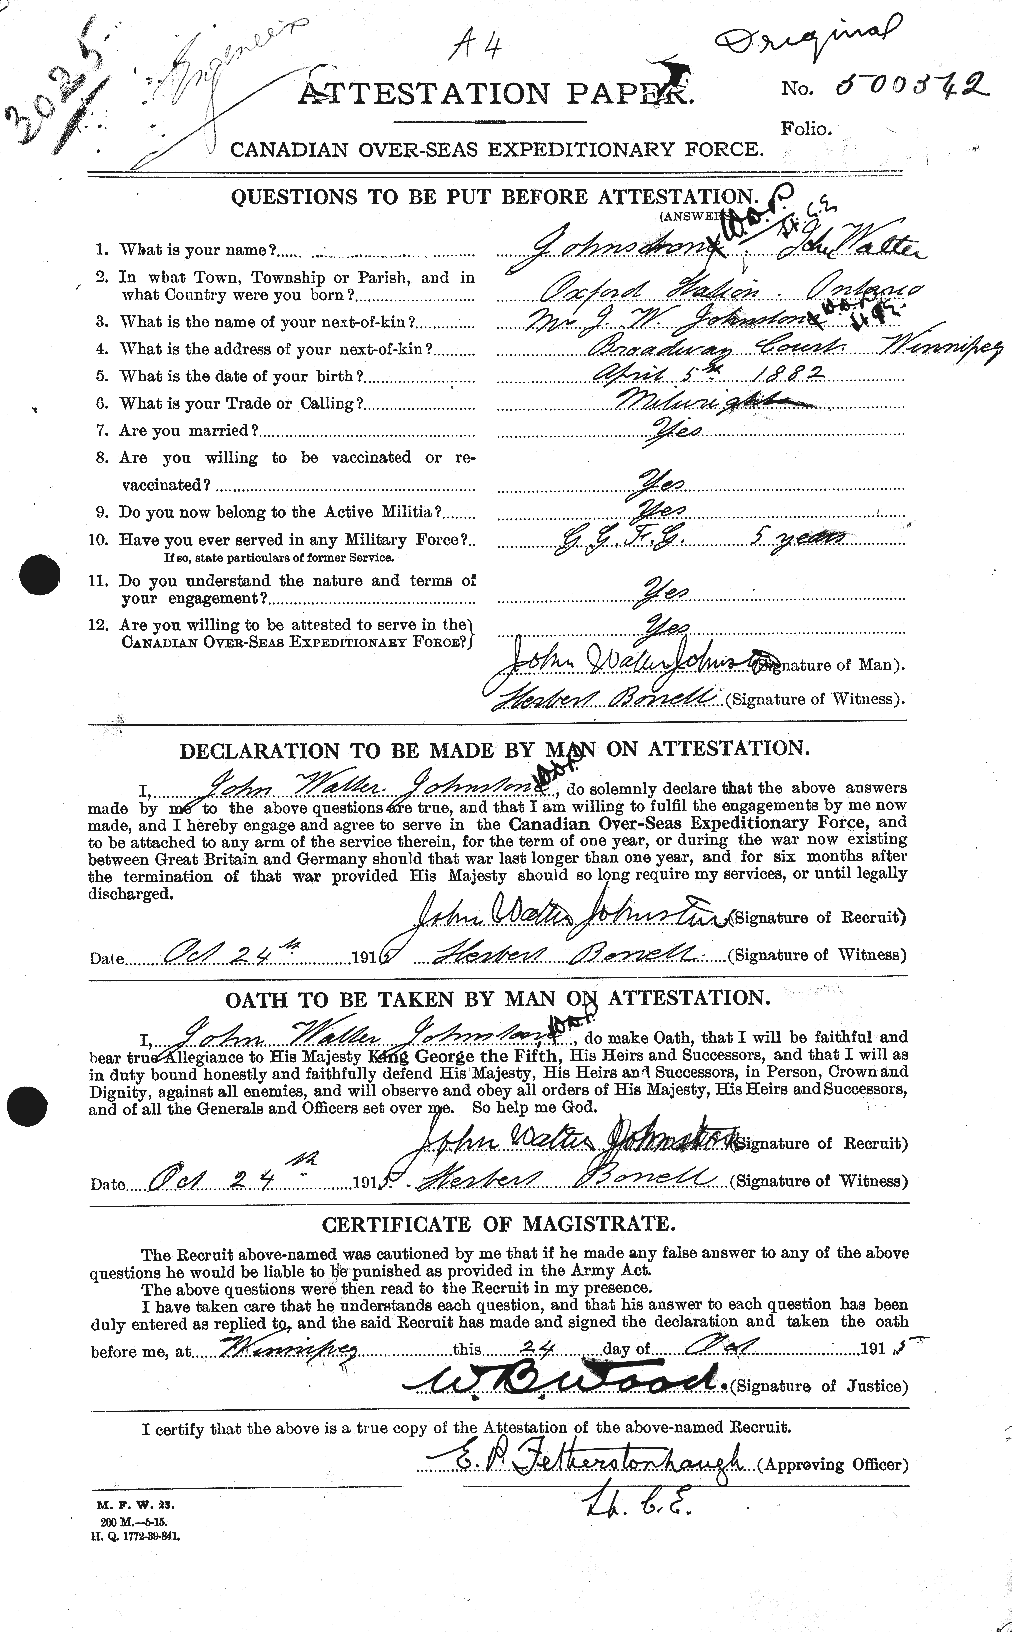 Personnel Records of the First World War - CEF 422878a